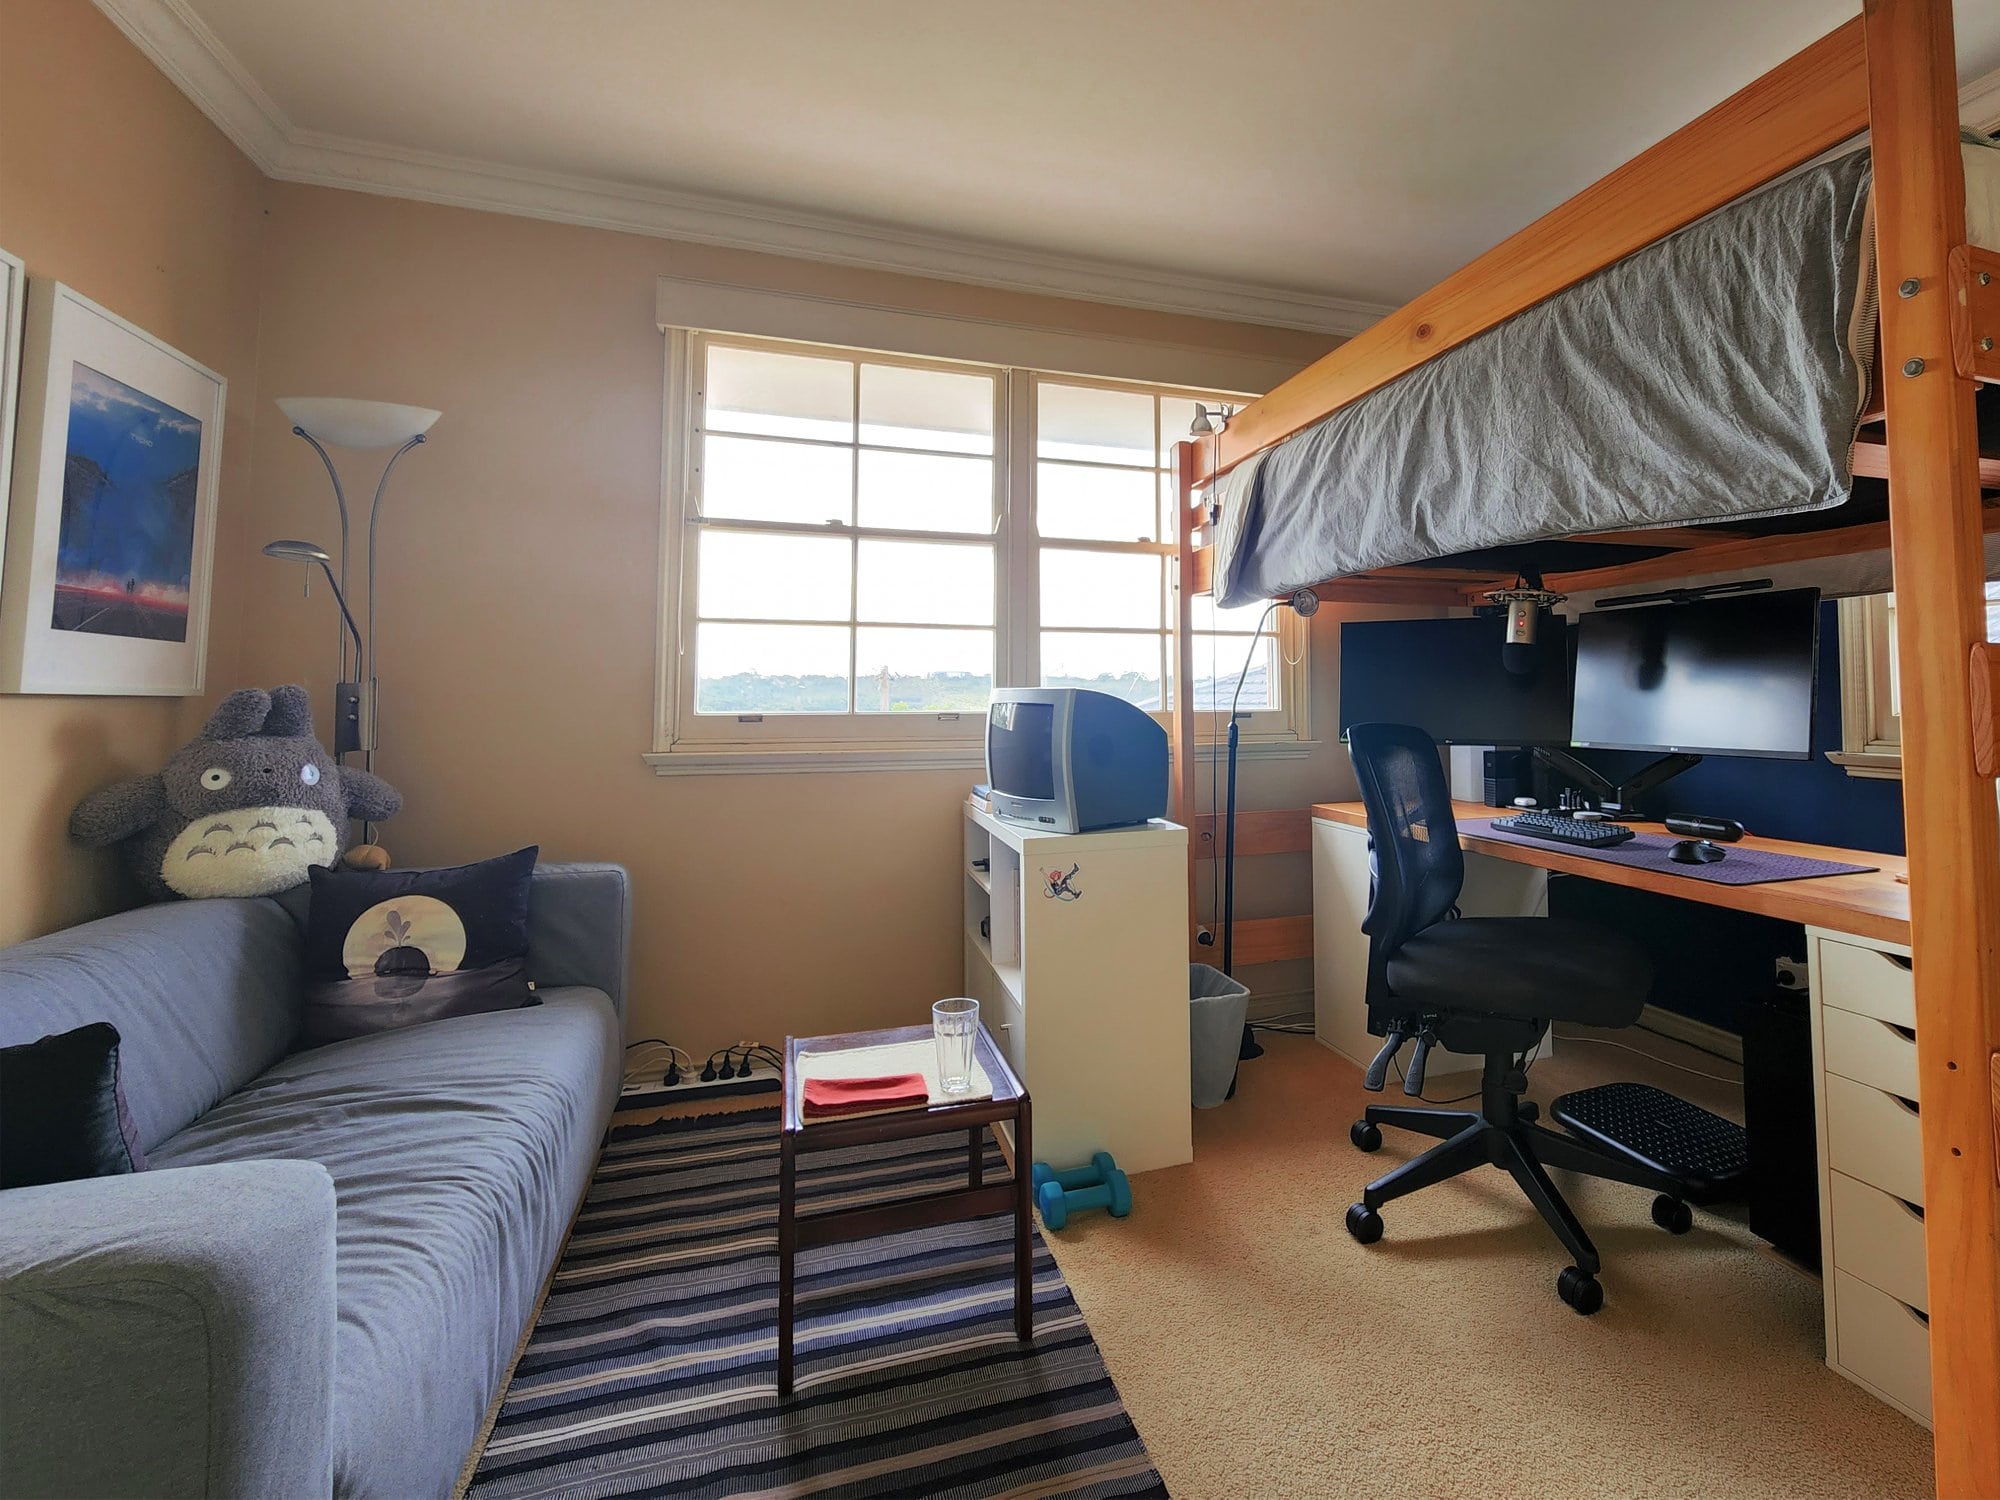 A bedroom divided into two halves. One side features the loft bed and desk setup, and the other side features the couch, PlayStation 2 and CRT television